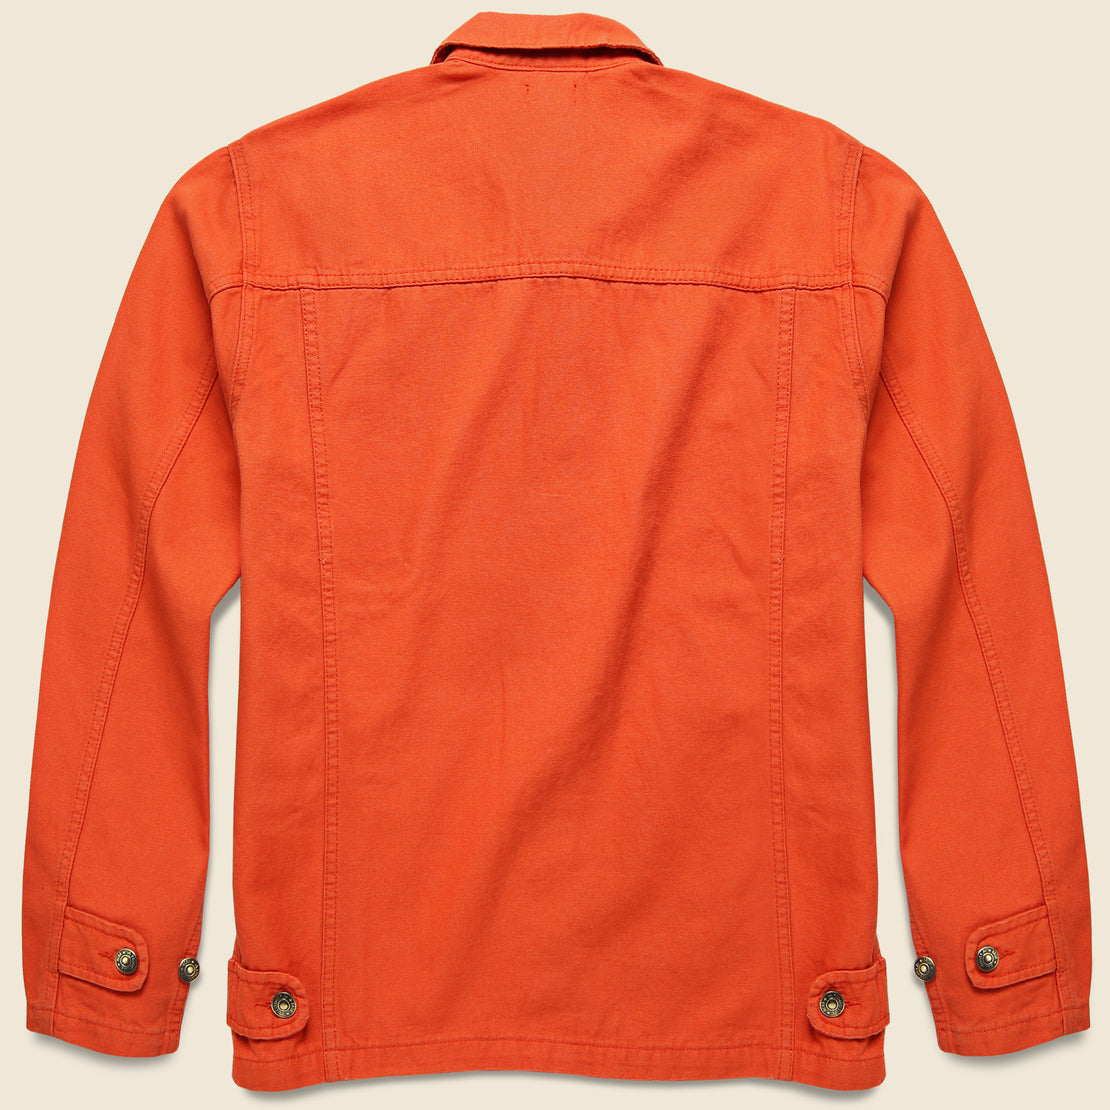 Cotton Chore Coat - Orange - Armor Lux - STAG Provisions - Outerwear - Shirt Jacket